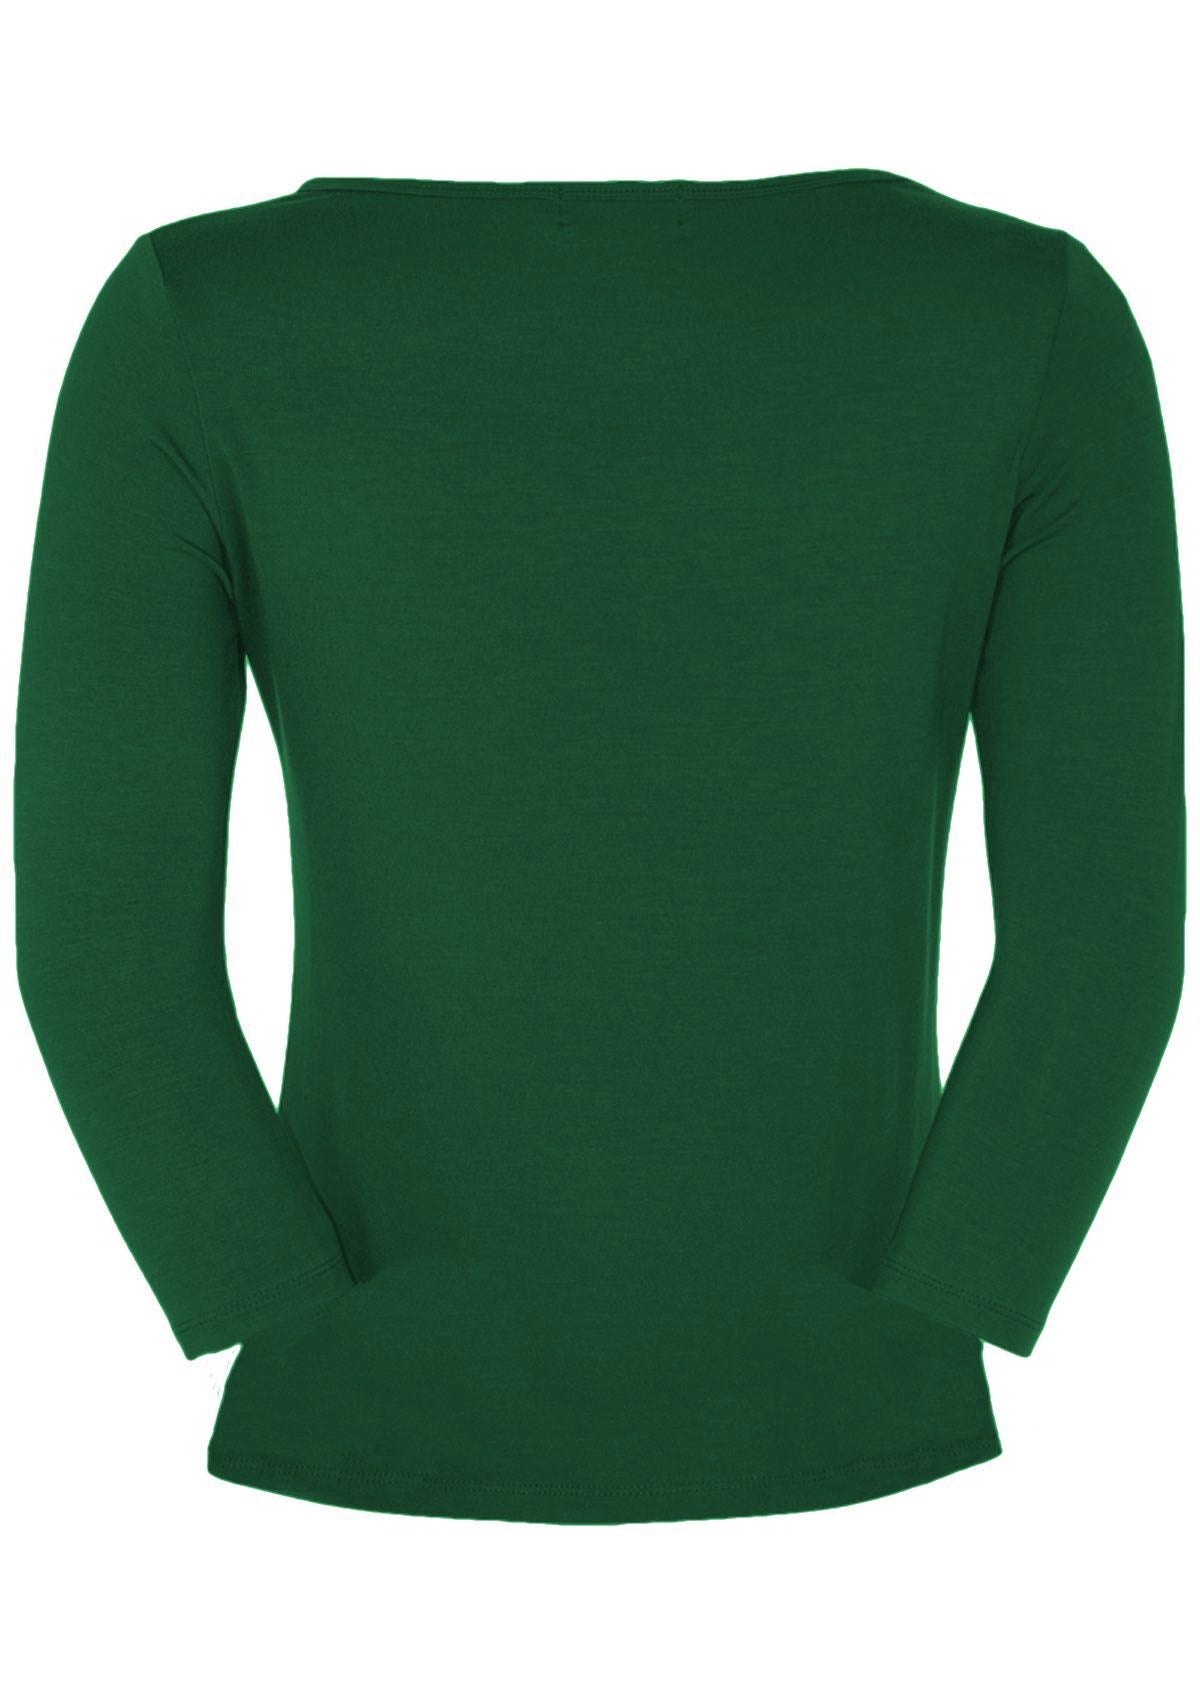 Back view of women's rayon boat neck green 3/4 sleeve top.